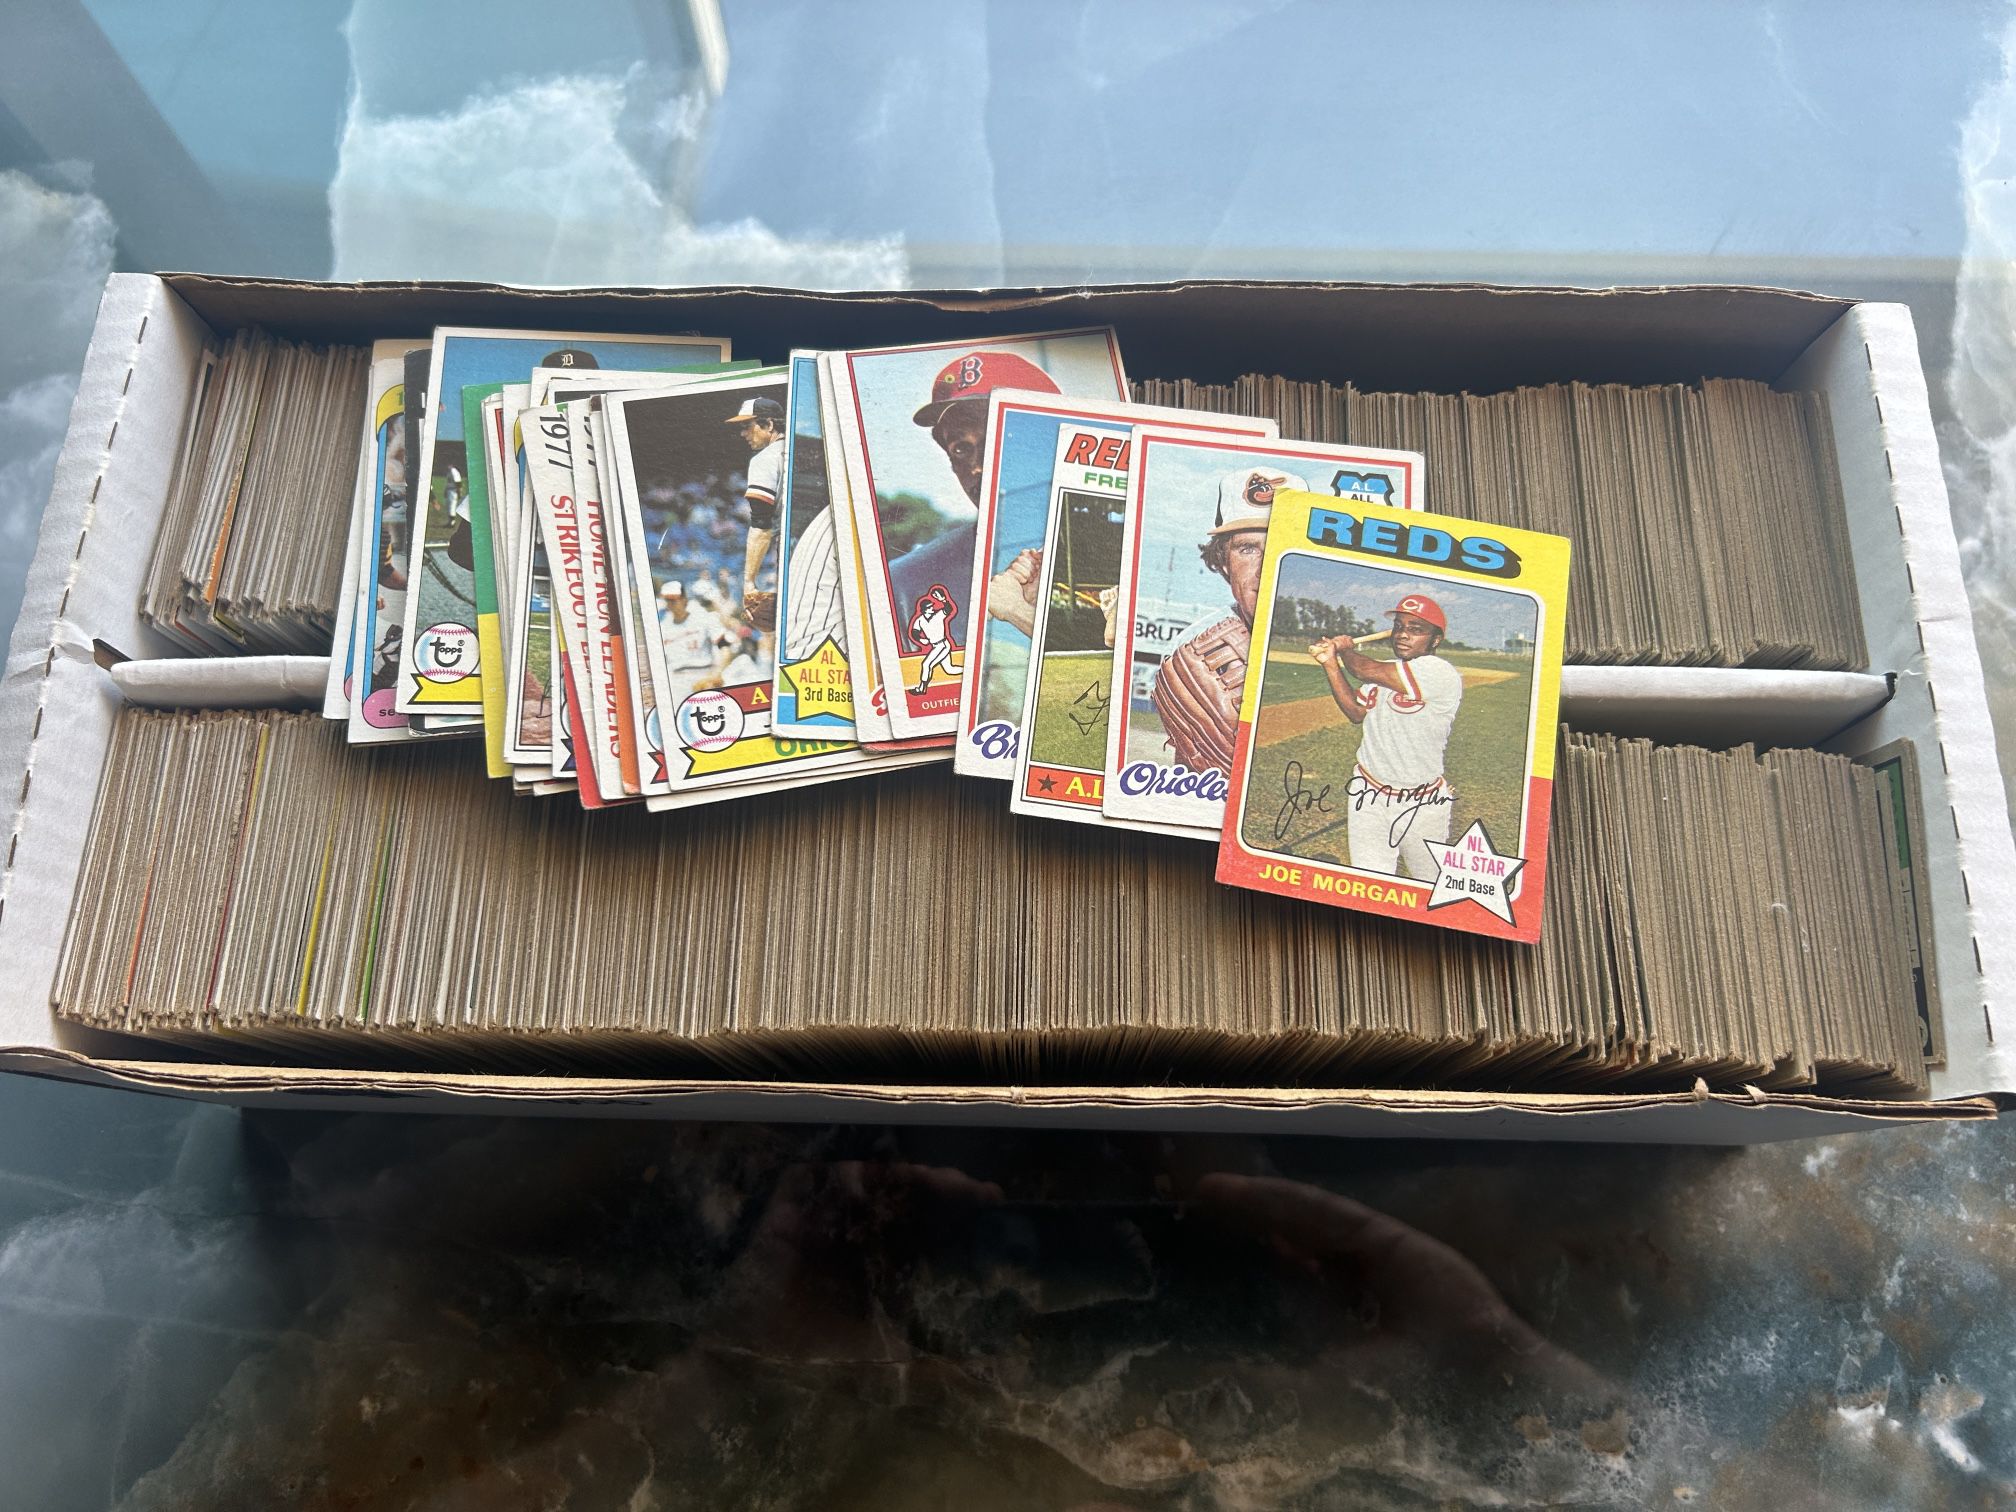 1970’s Baseball Cards SEE PICS!! 1800+ Cards From The 1970’s Stars HOF Players 